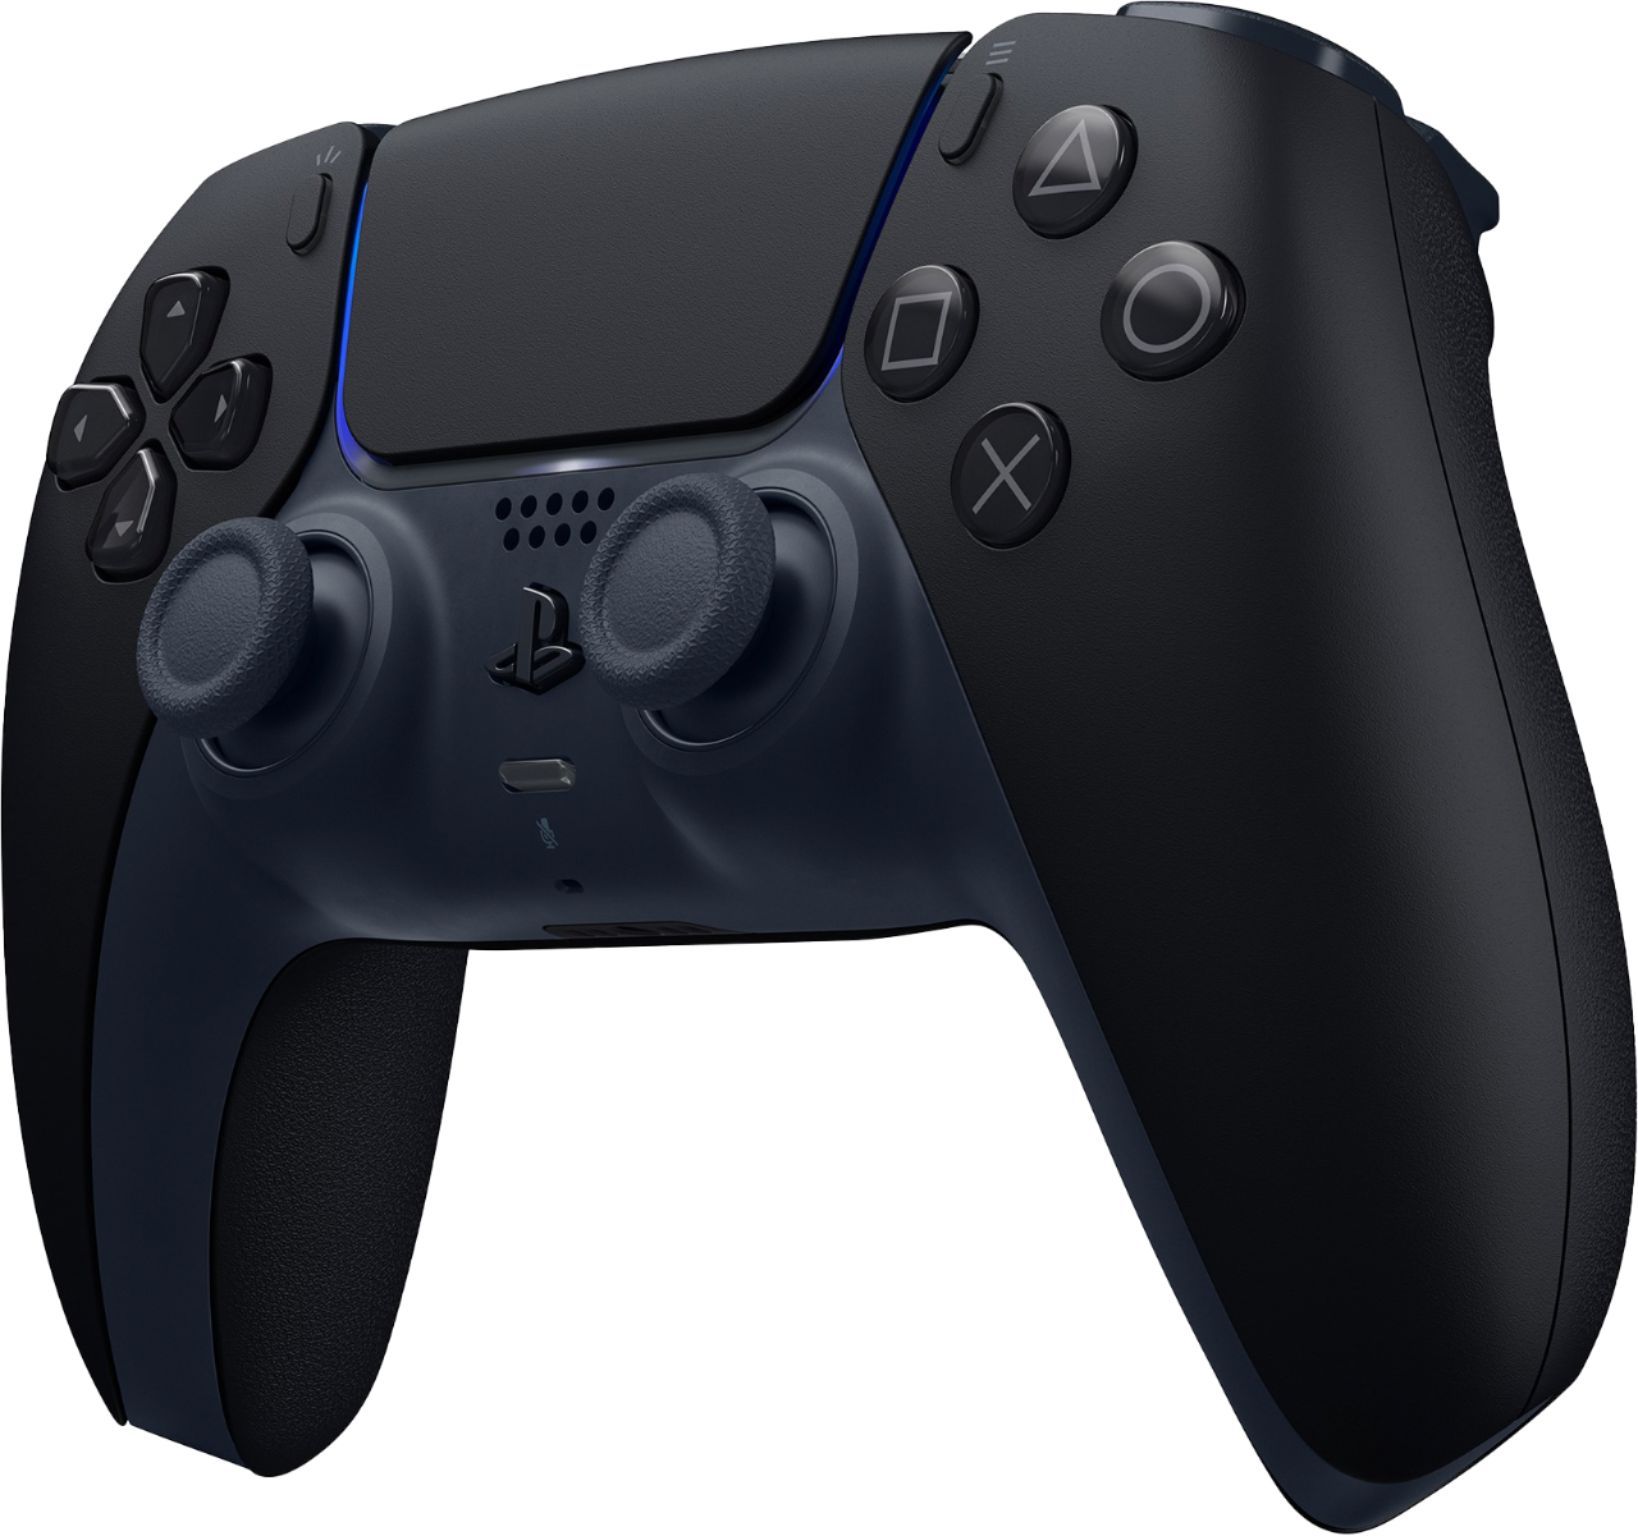 Sony - PlayStation 5 - DualSense Wireless Controller - Midnight Black |  American Outlets